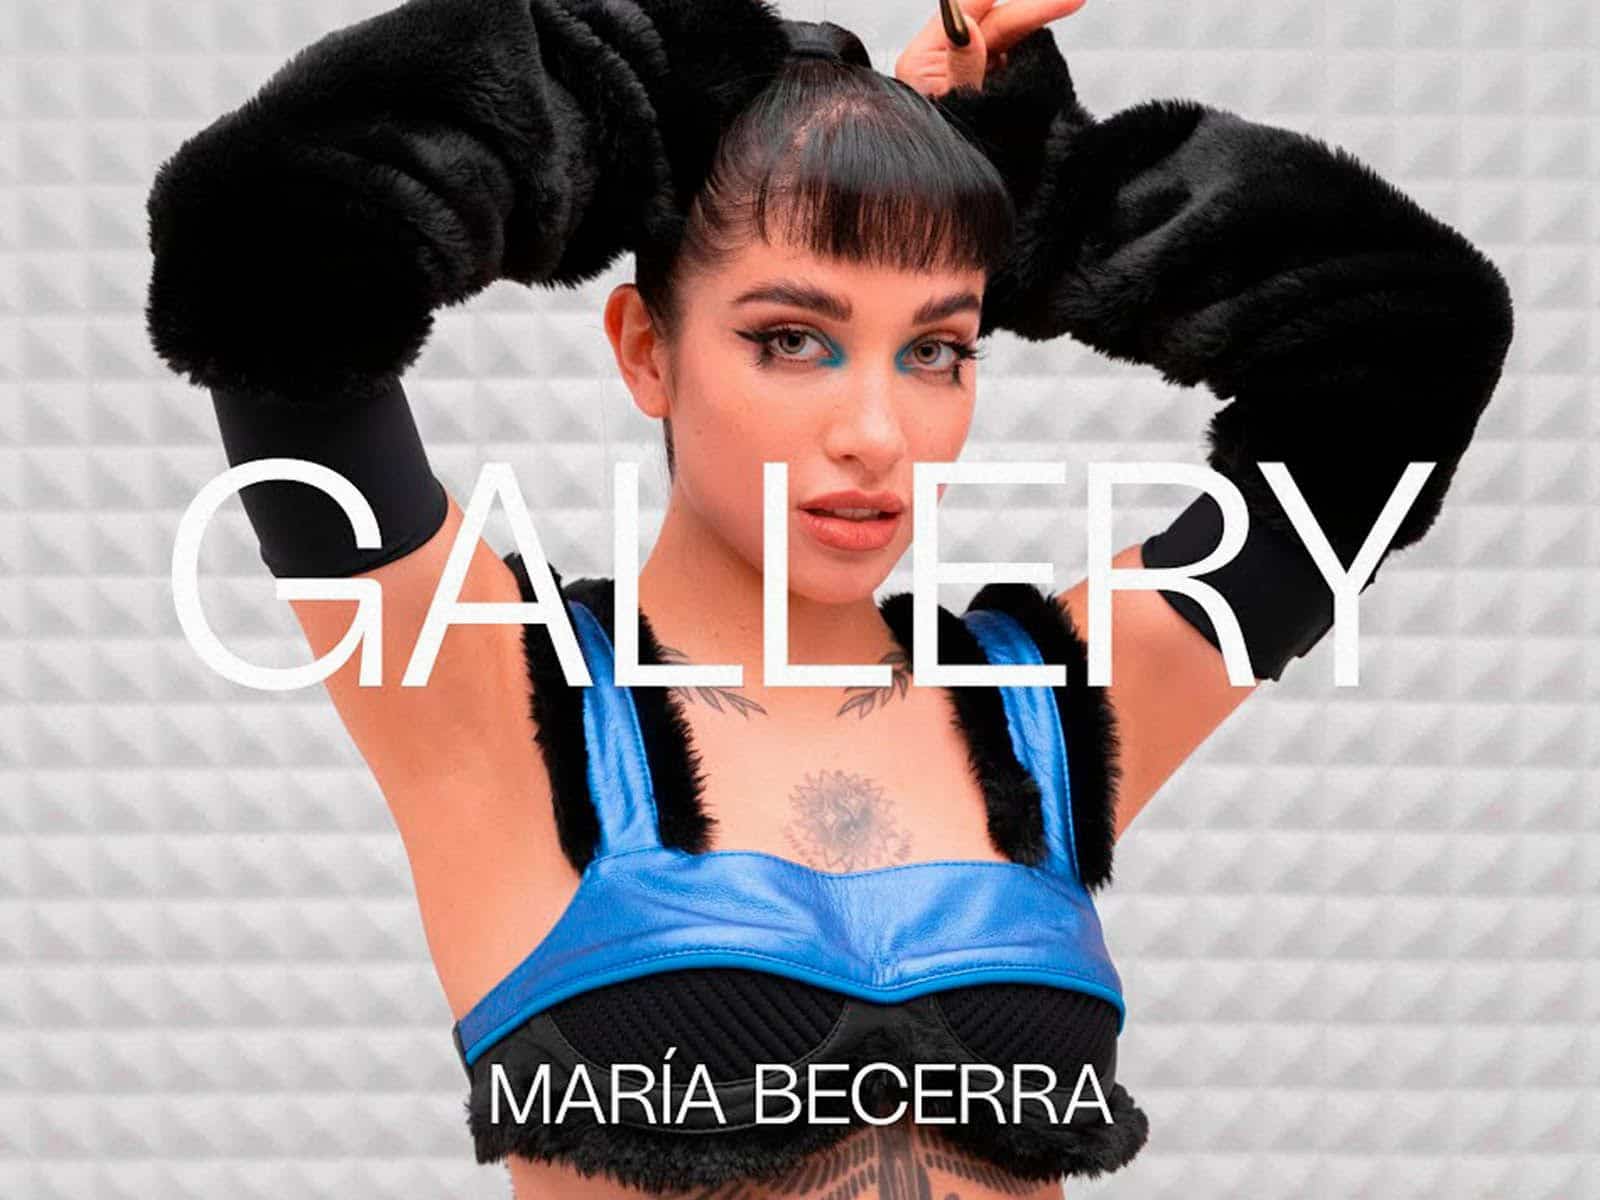 María Becerra at Gallery Sessions with her hit “Ojalá”